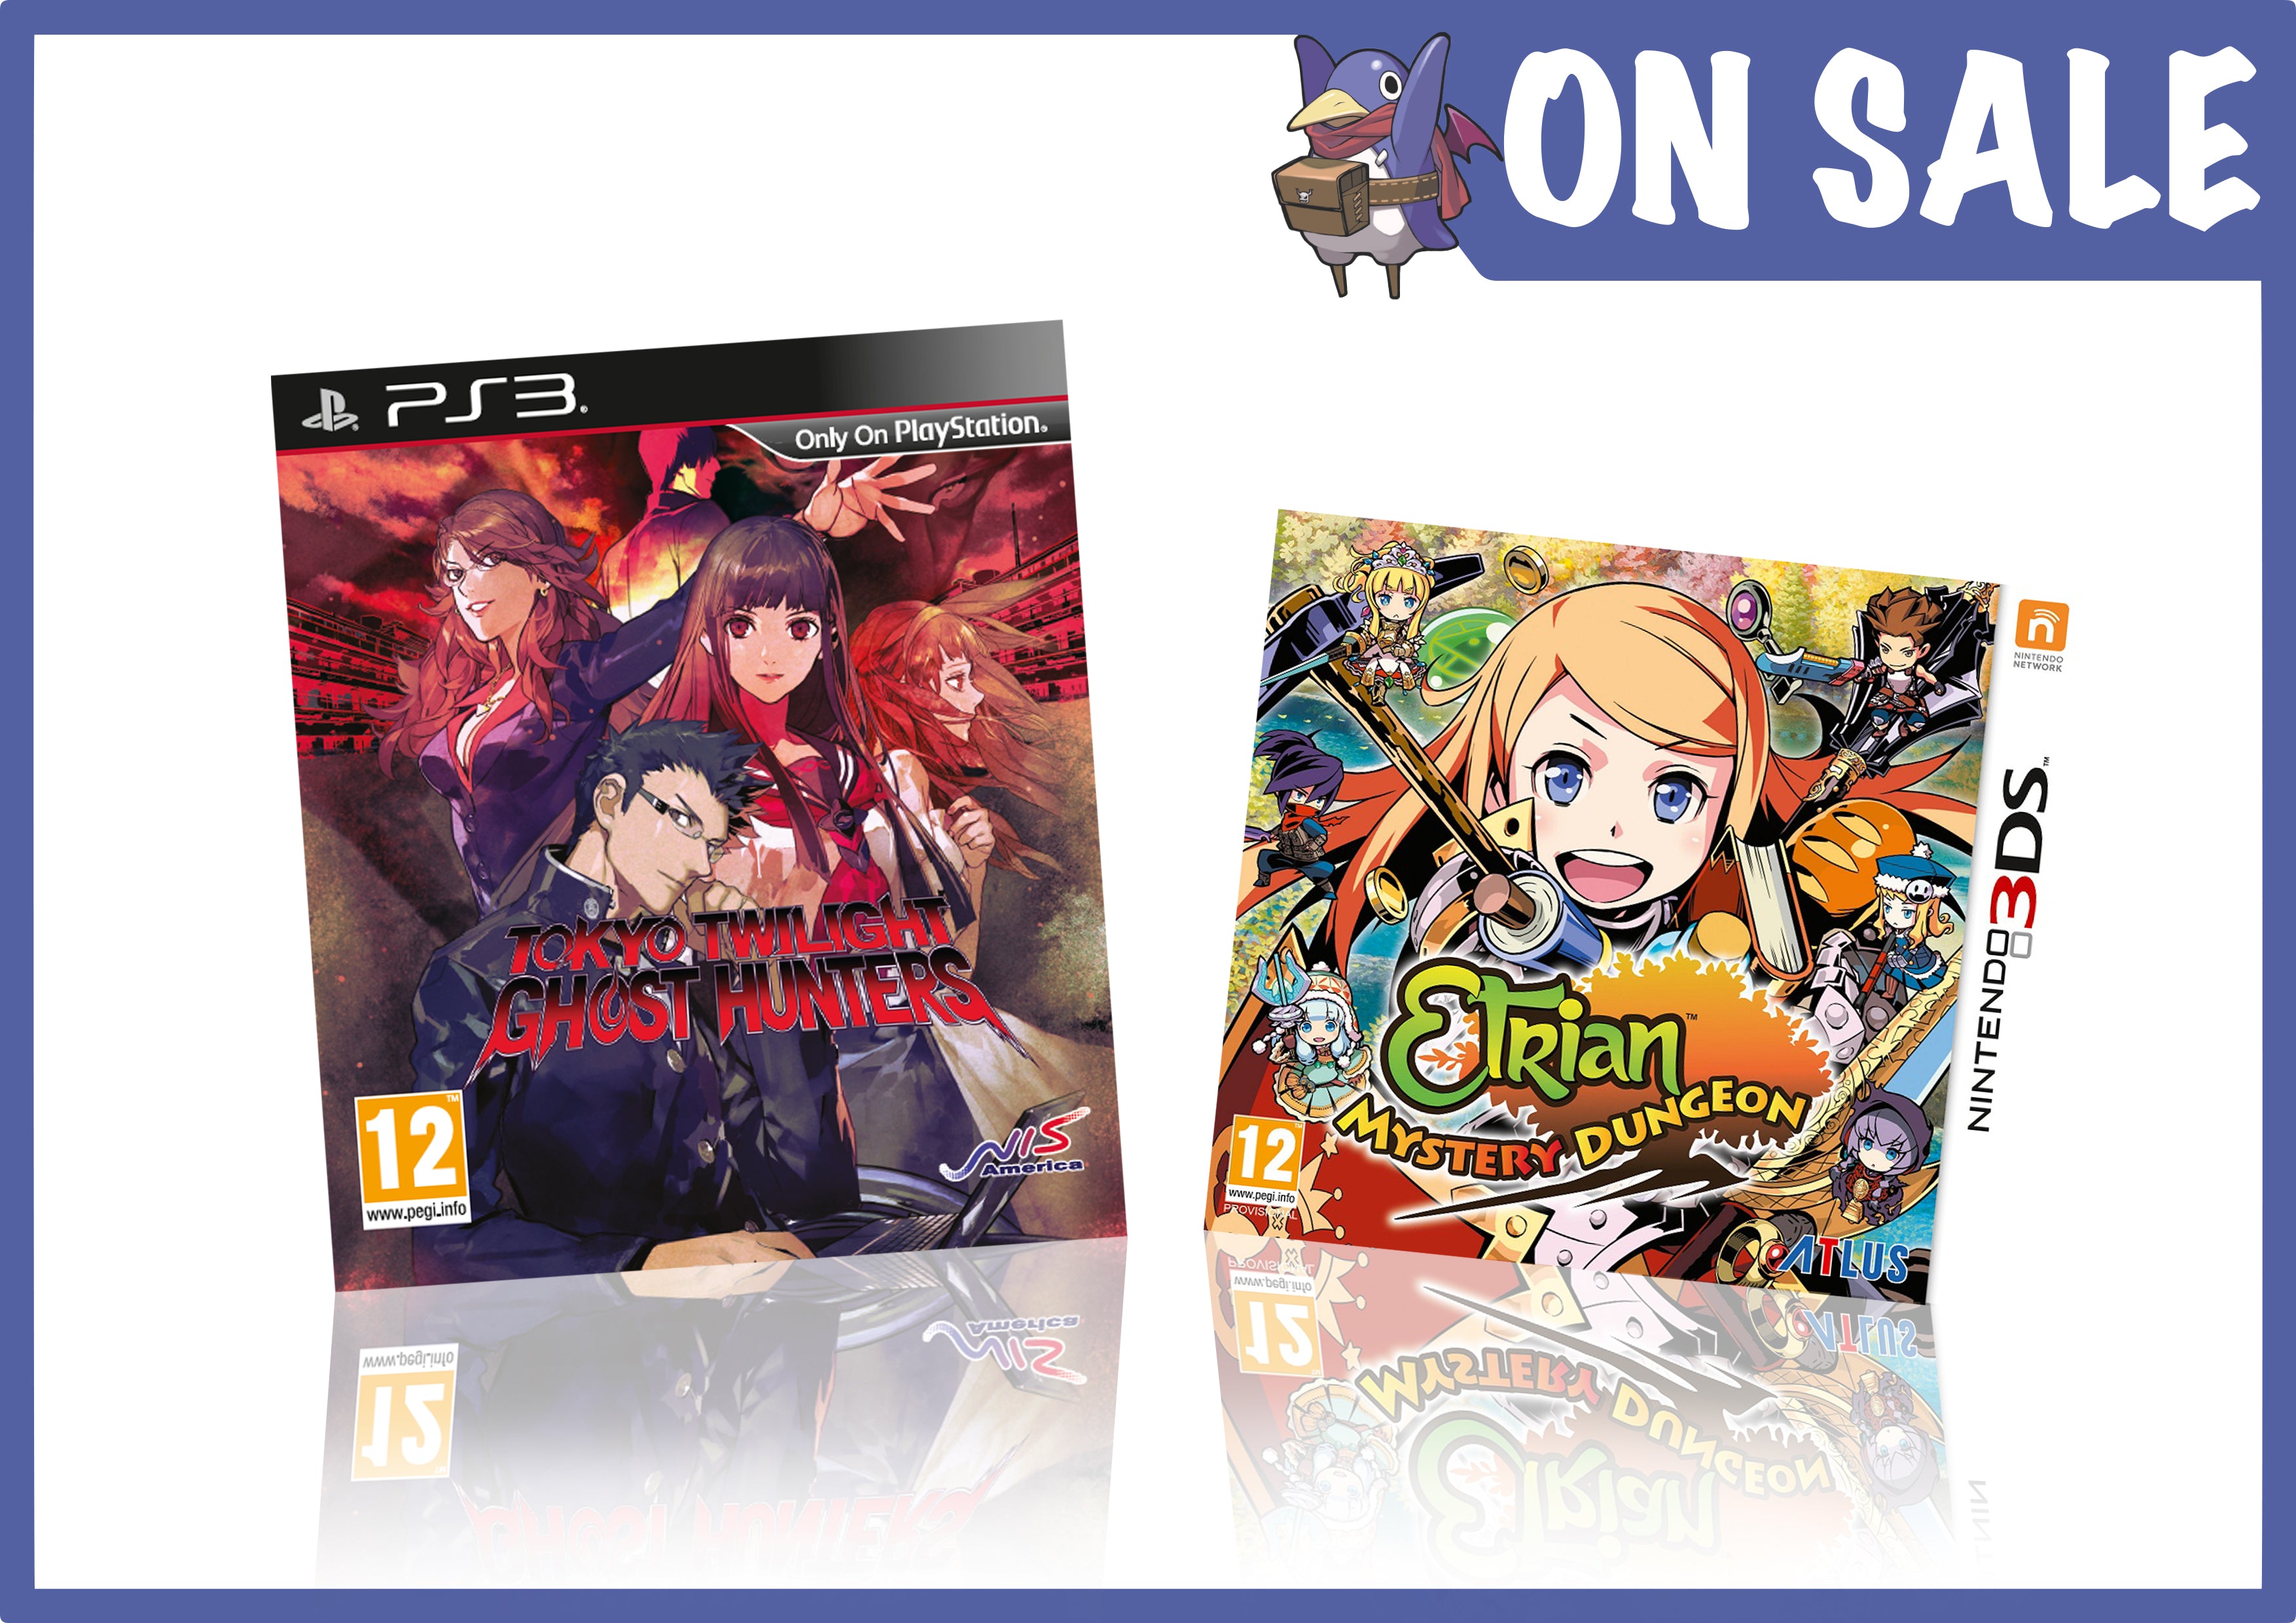 Deal of the Week - Etrian Mystery Dungeon and Tokyo Twilight Ghost Hunters!